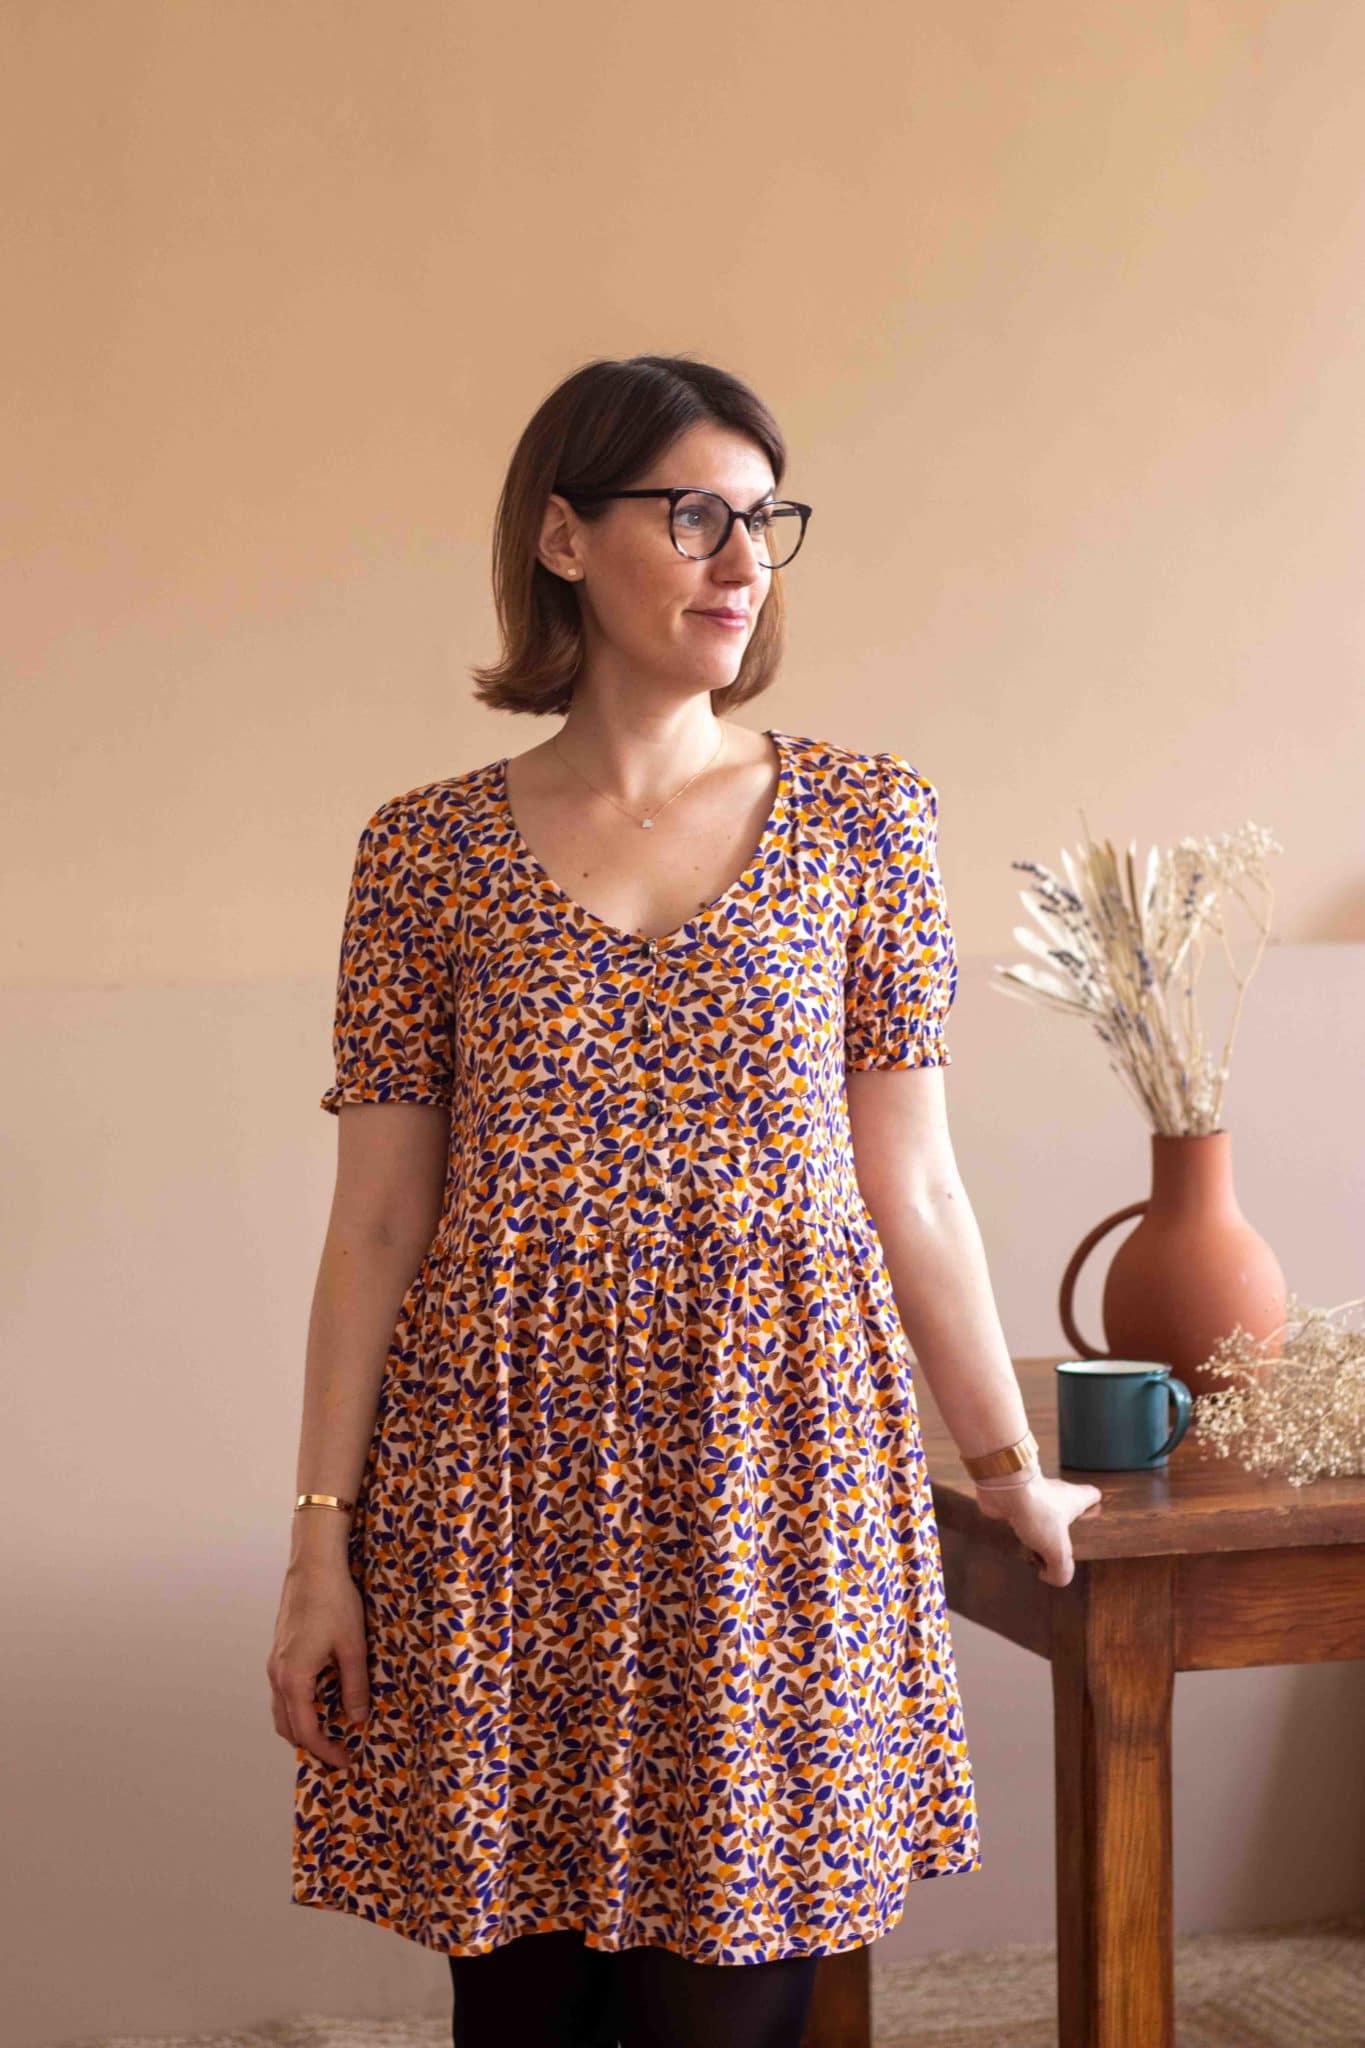 Lise Tailor - Comete Dress and Blouse Sewing Pattern